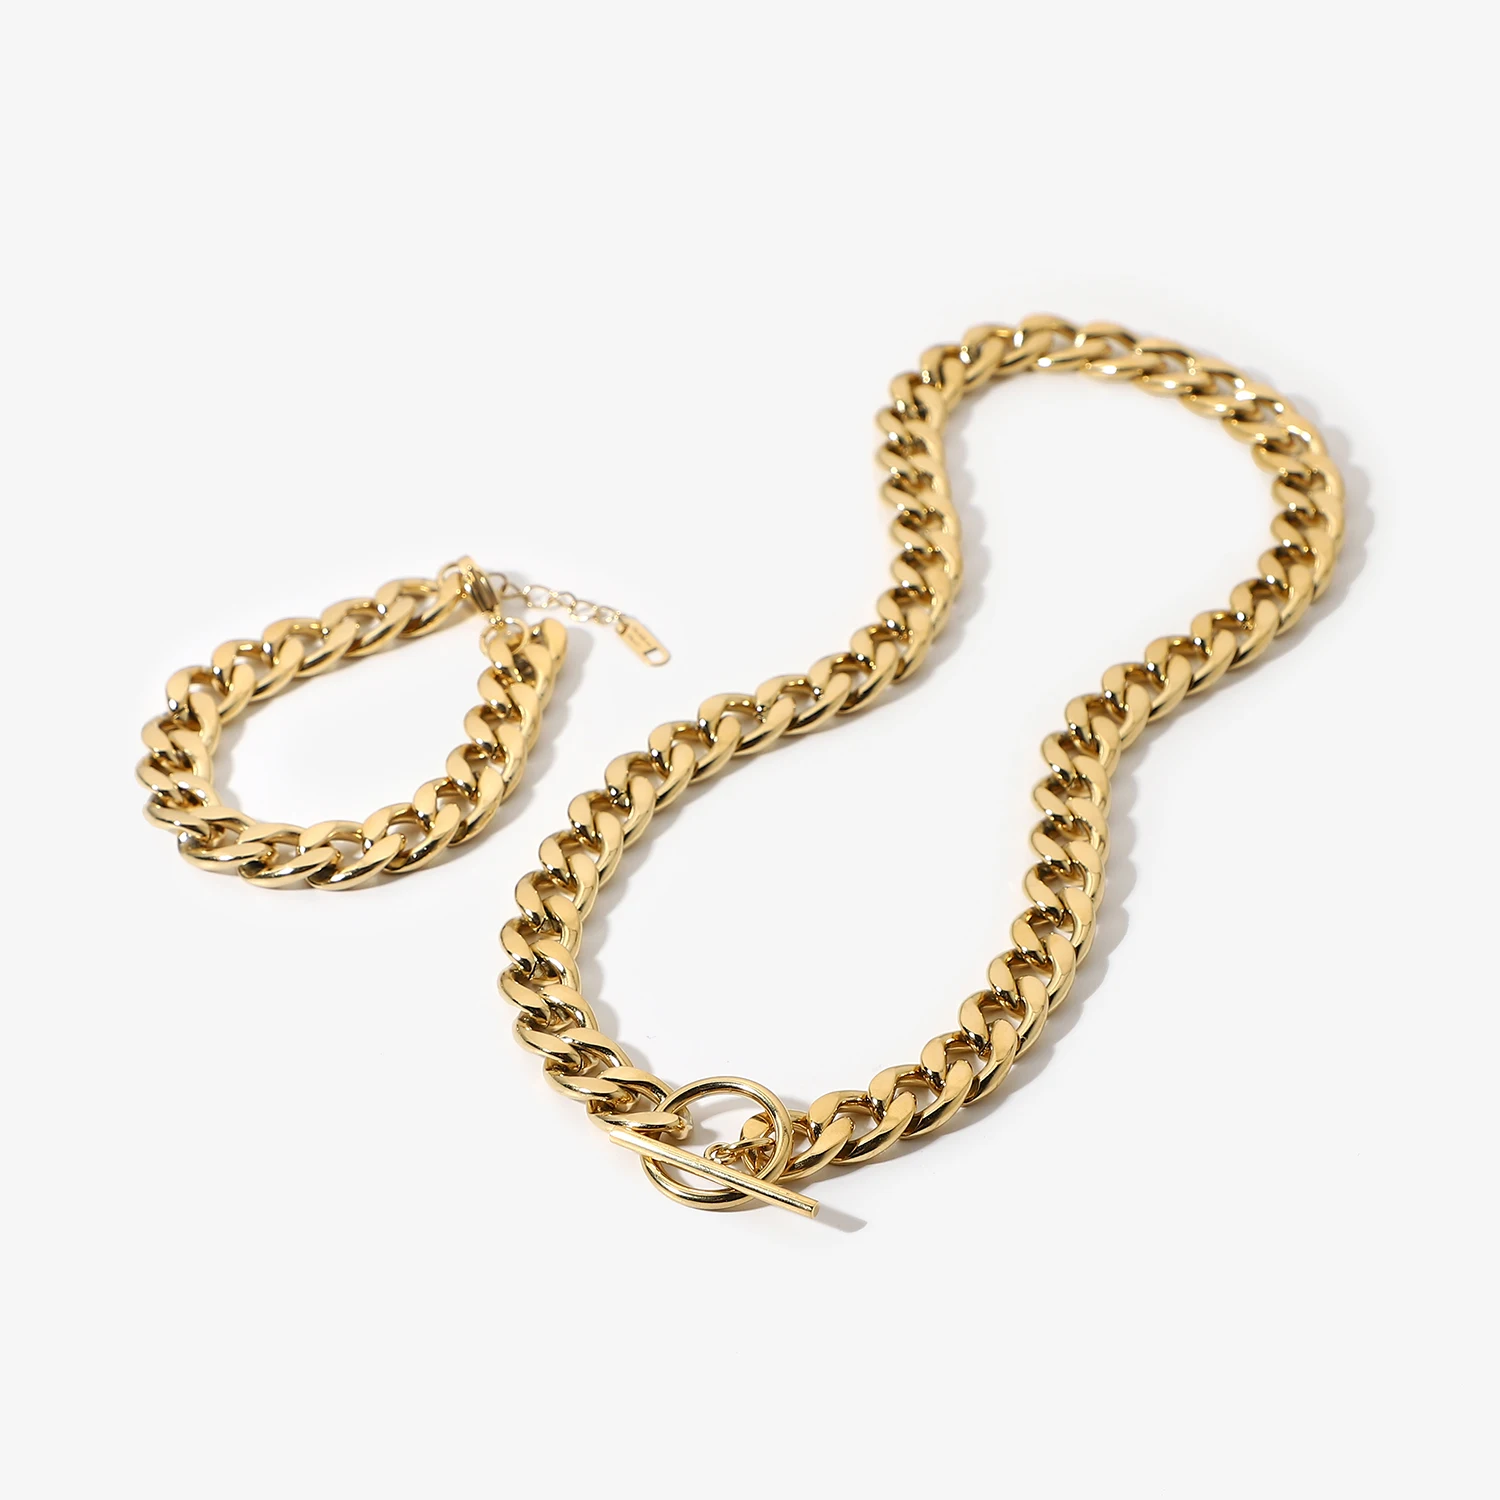 

Punk 11mm Thick Miami Cuban Chain Necklace Bracelets Chunky 14K Gold Plated OT Stick Buckle Stainless Steel Jewelry Sets